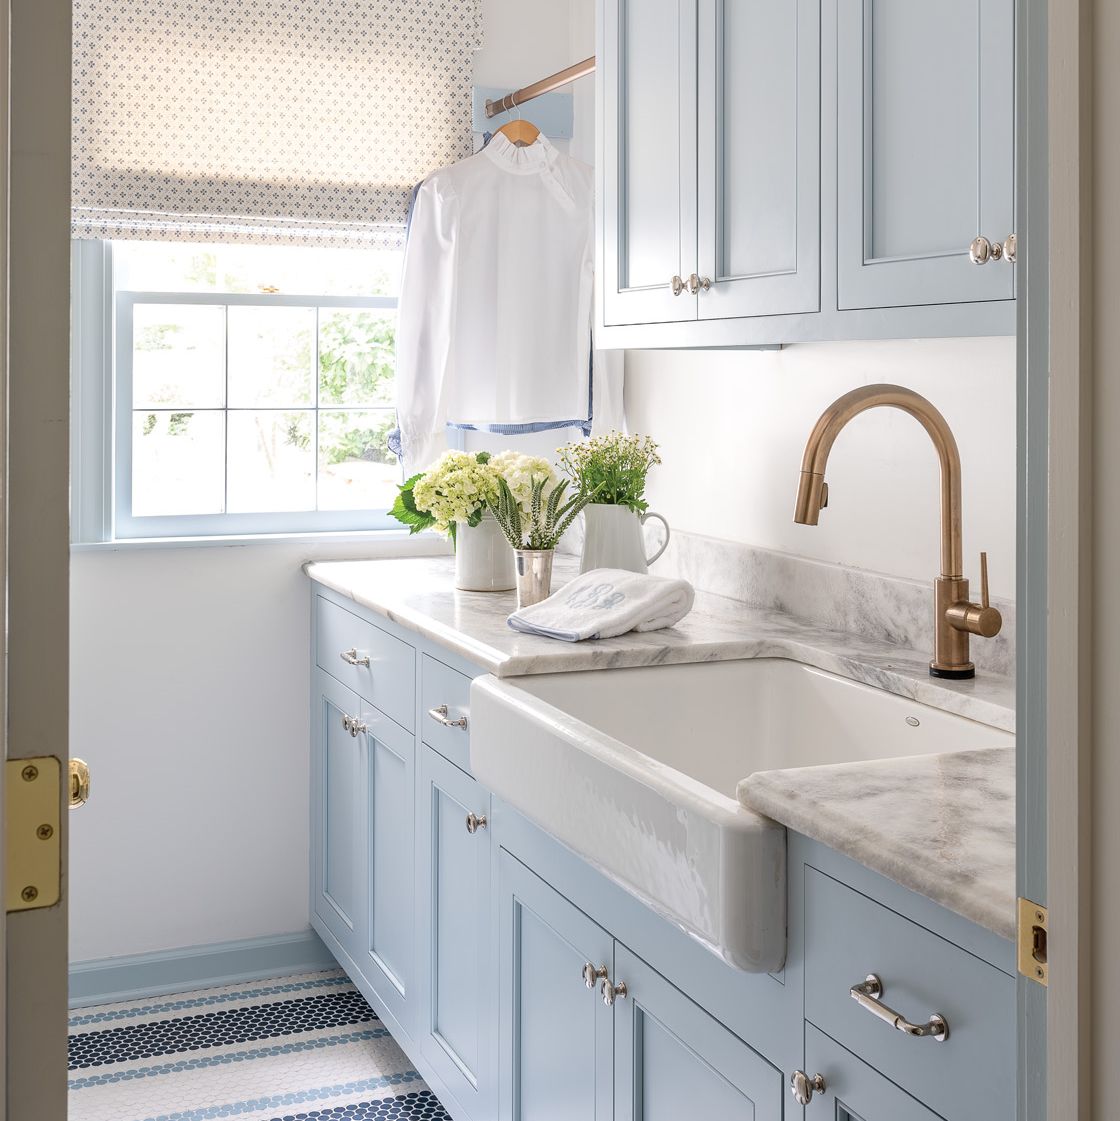 Laundry Room Ideas That Are Fresh and Functional